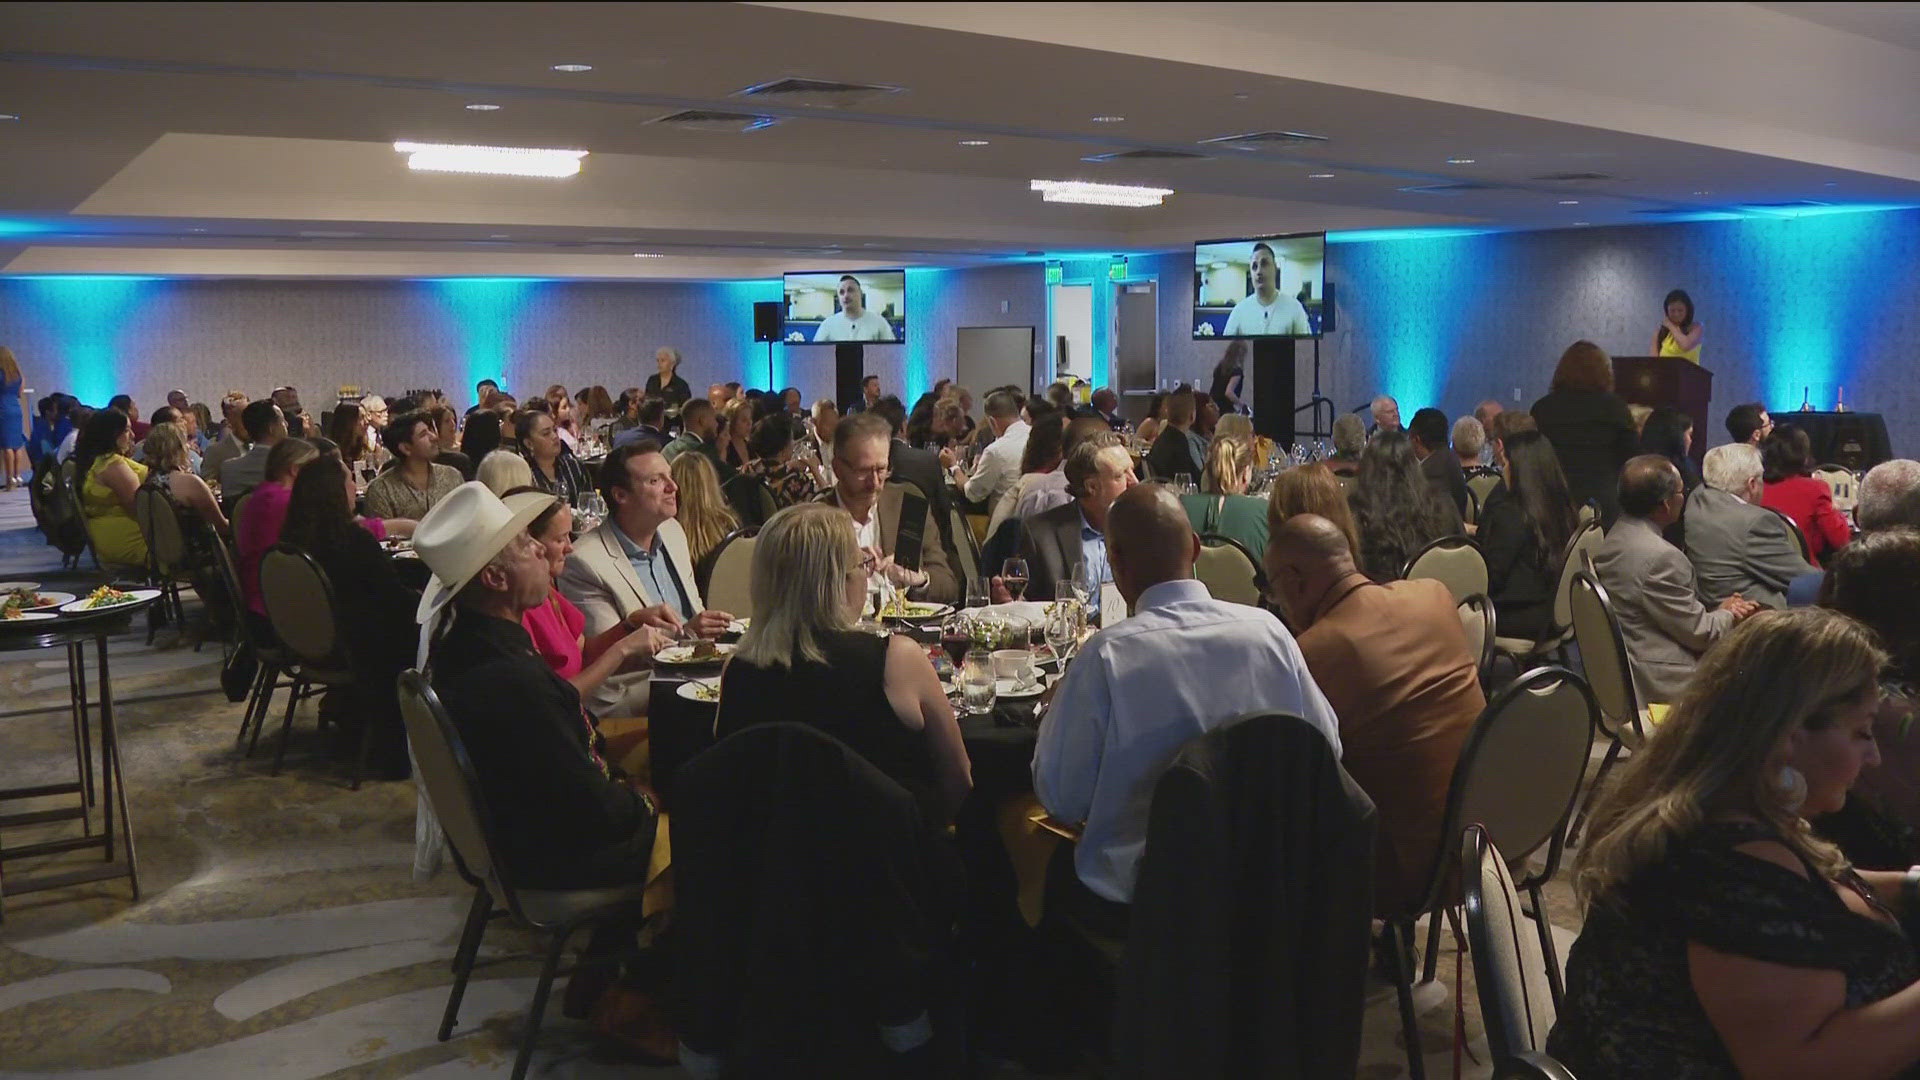 The organization "Second Chance" hosted the "Legacy of Impact Gala" Thursday night. CBS 8's Neda Iranpour was the MC for the event.